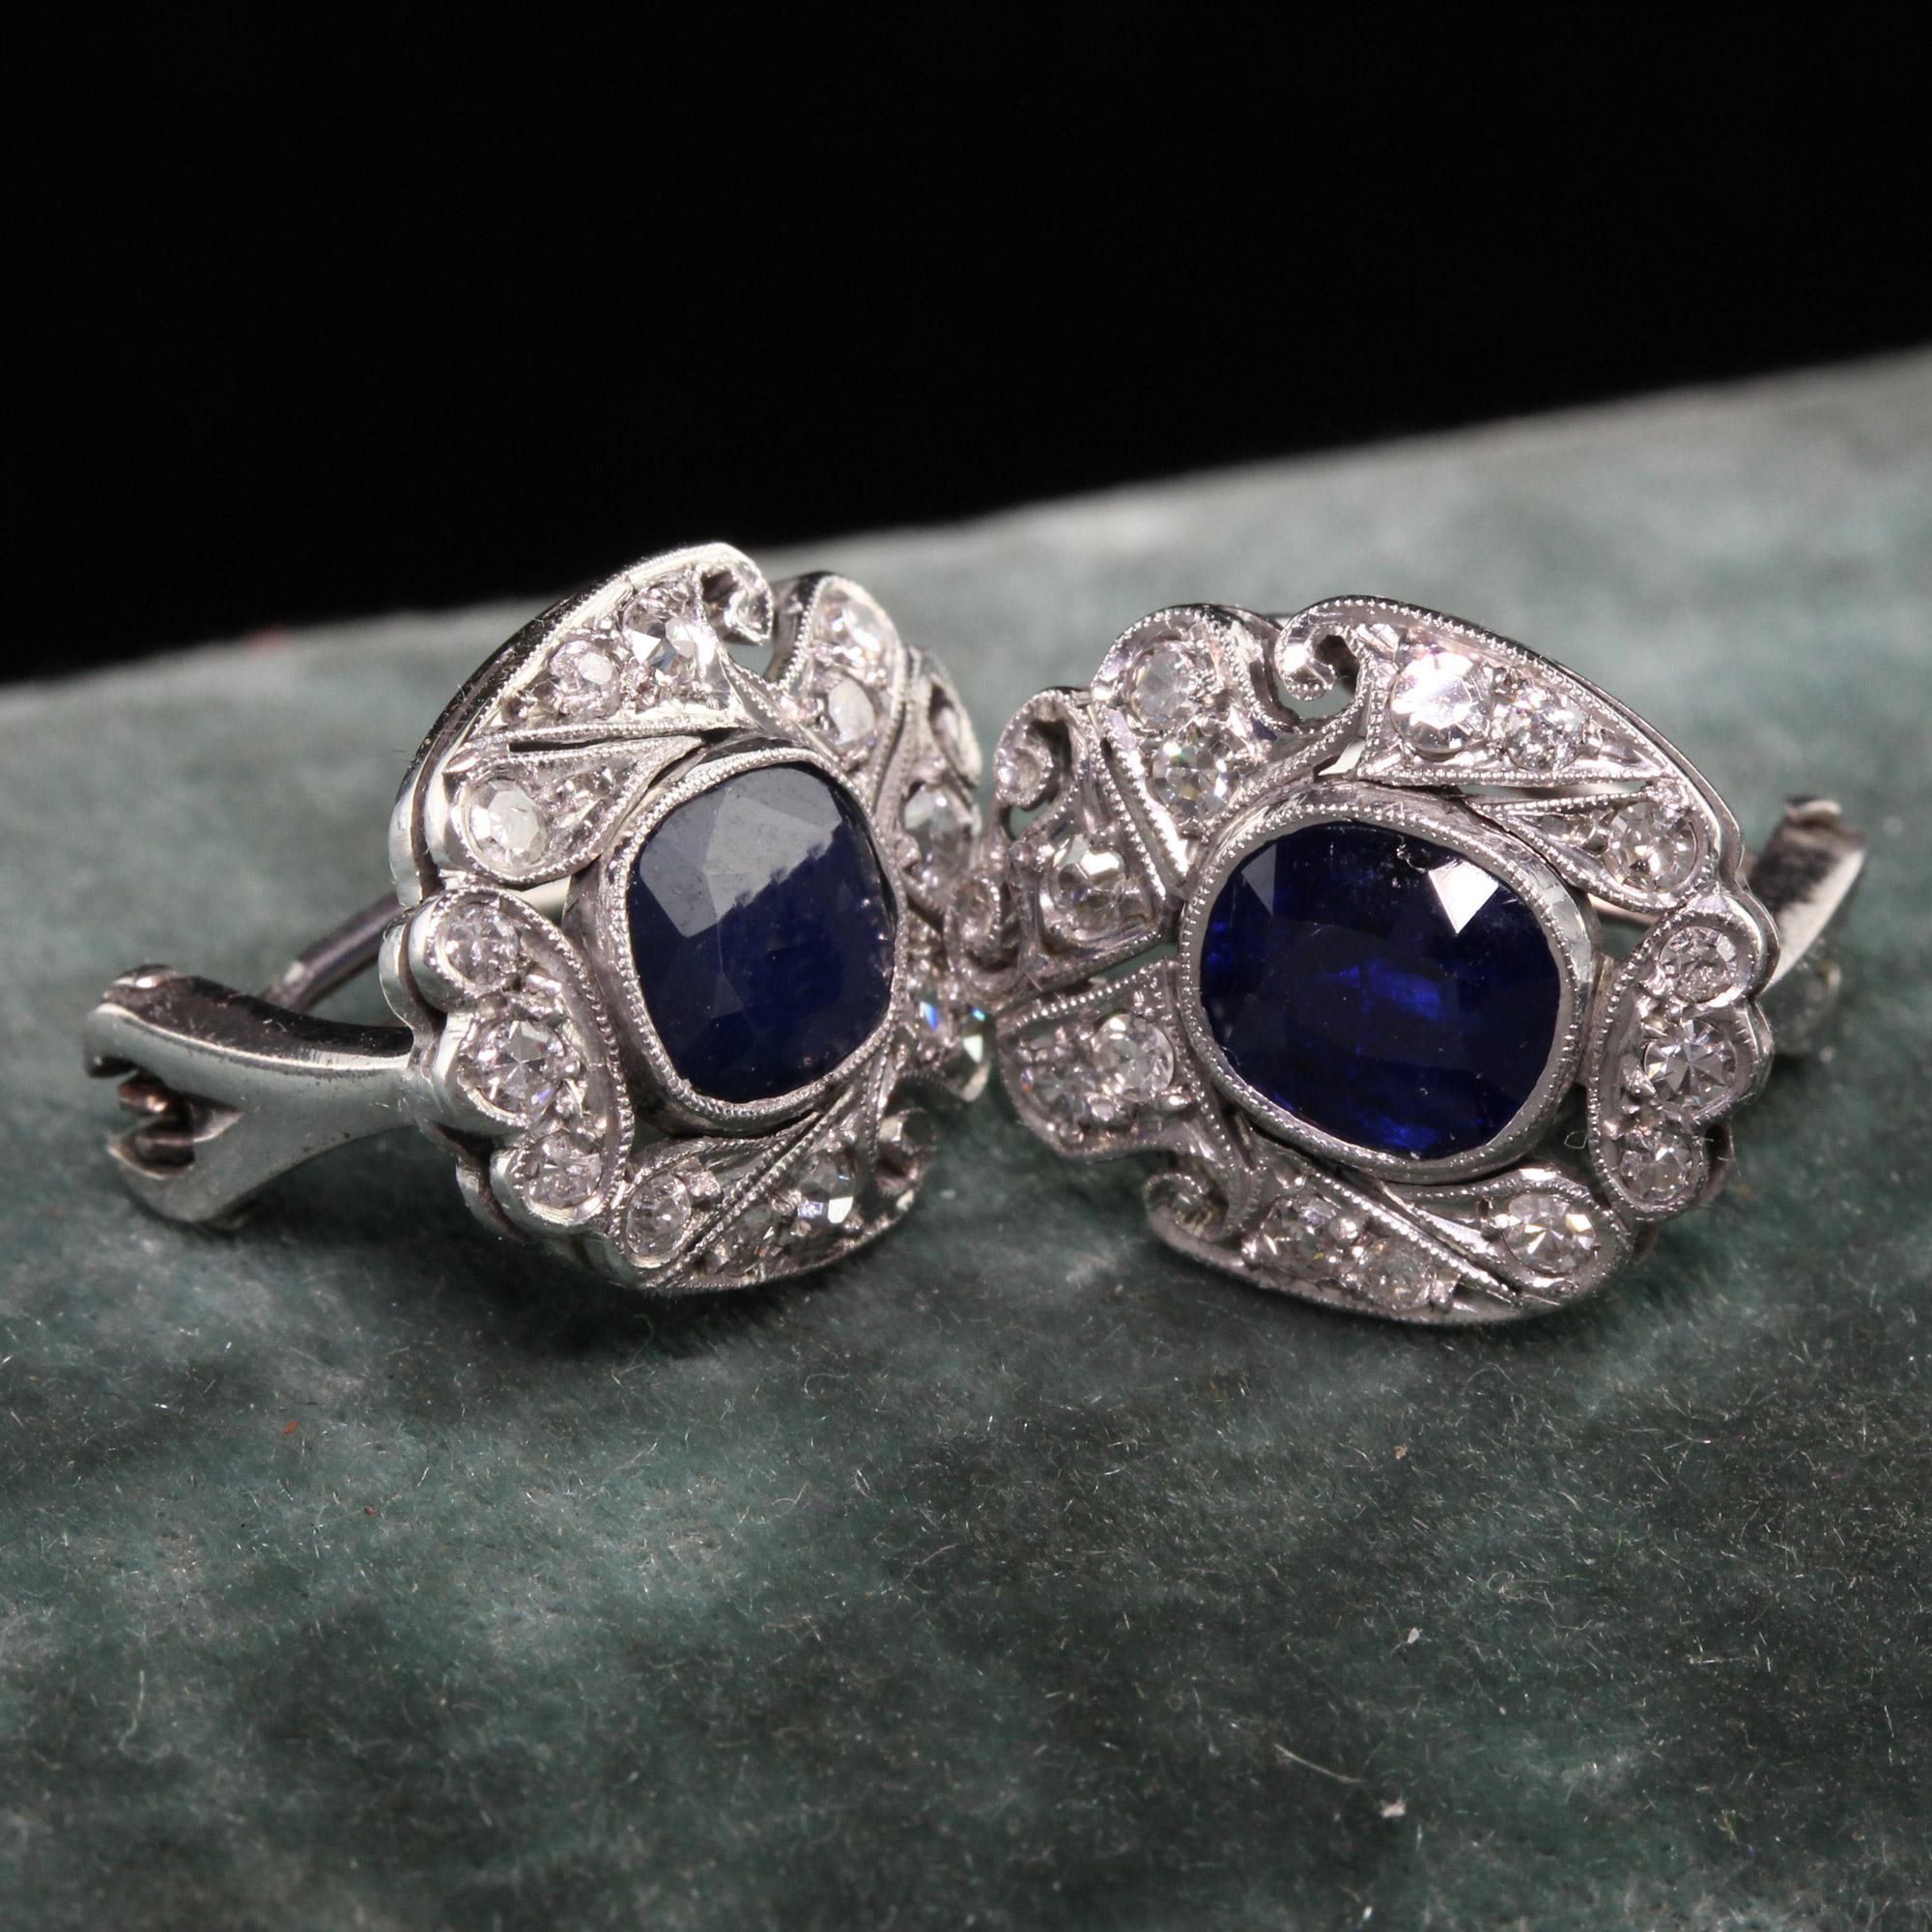 Gorgeous Antique Art Deco 14K White Gold Diamond and Sapphire Earrings. These gorgeous earrings have old cut diamonds and blue sapphires as center stones. They sit very well on the ear.

Item #E0036

Metal: 14k White Gold

Diamonds: Approximately